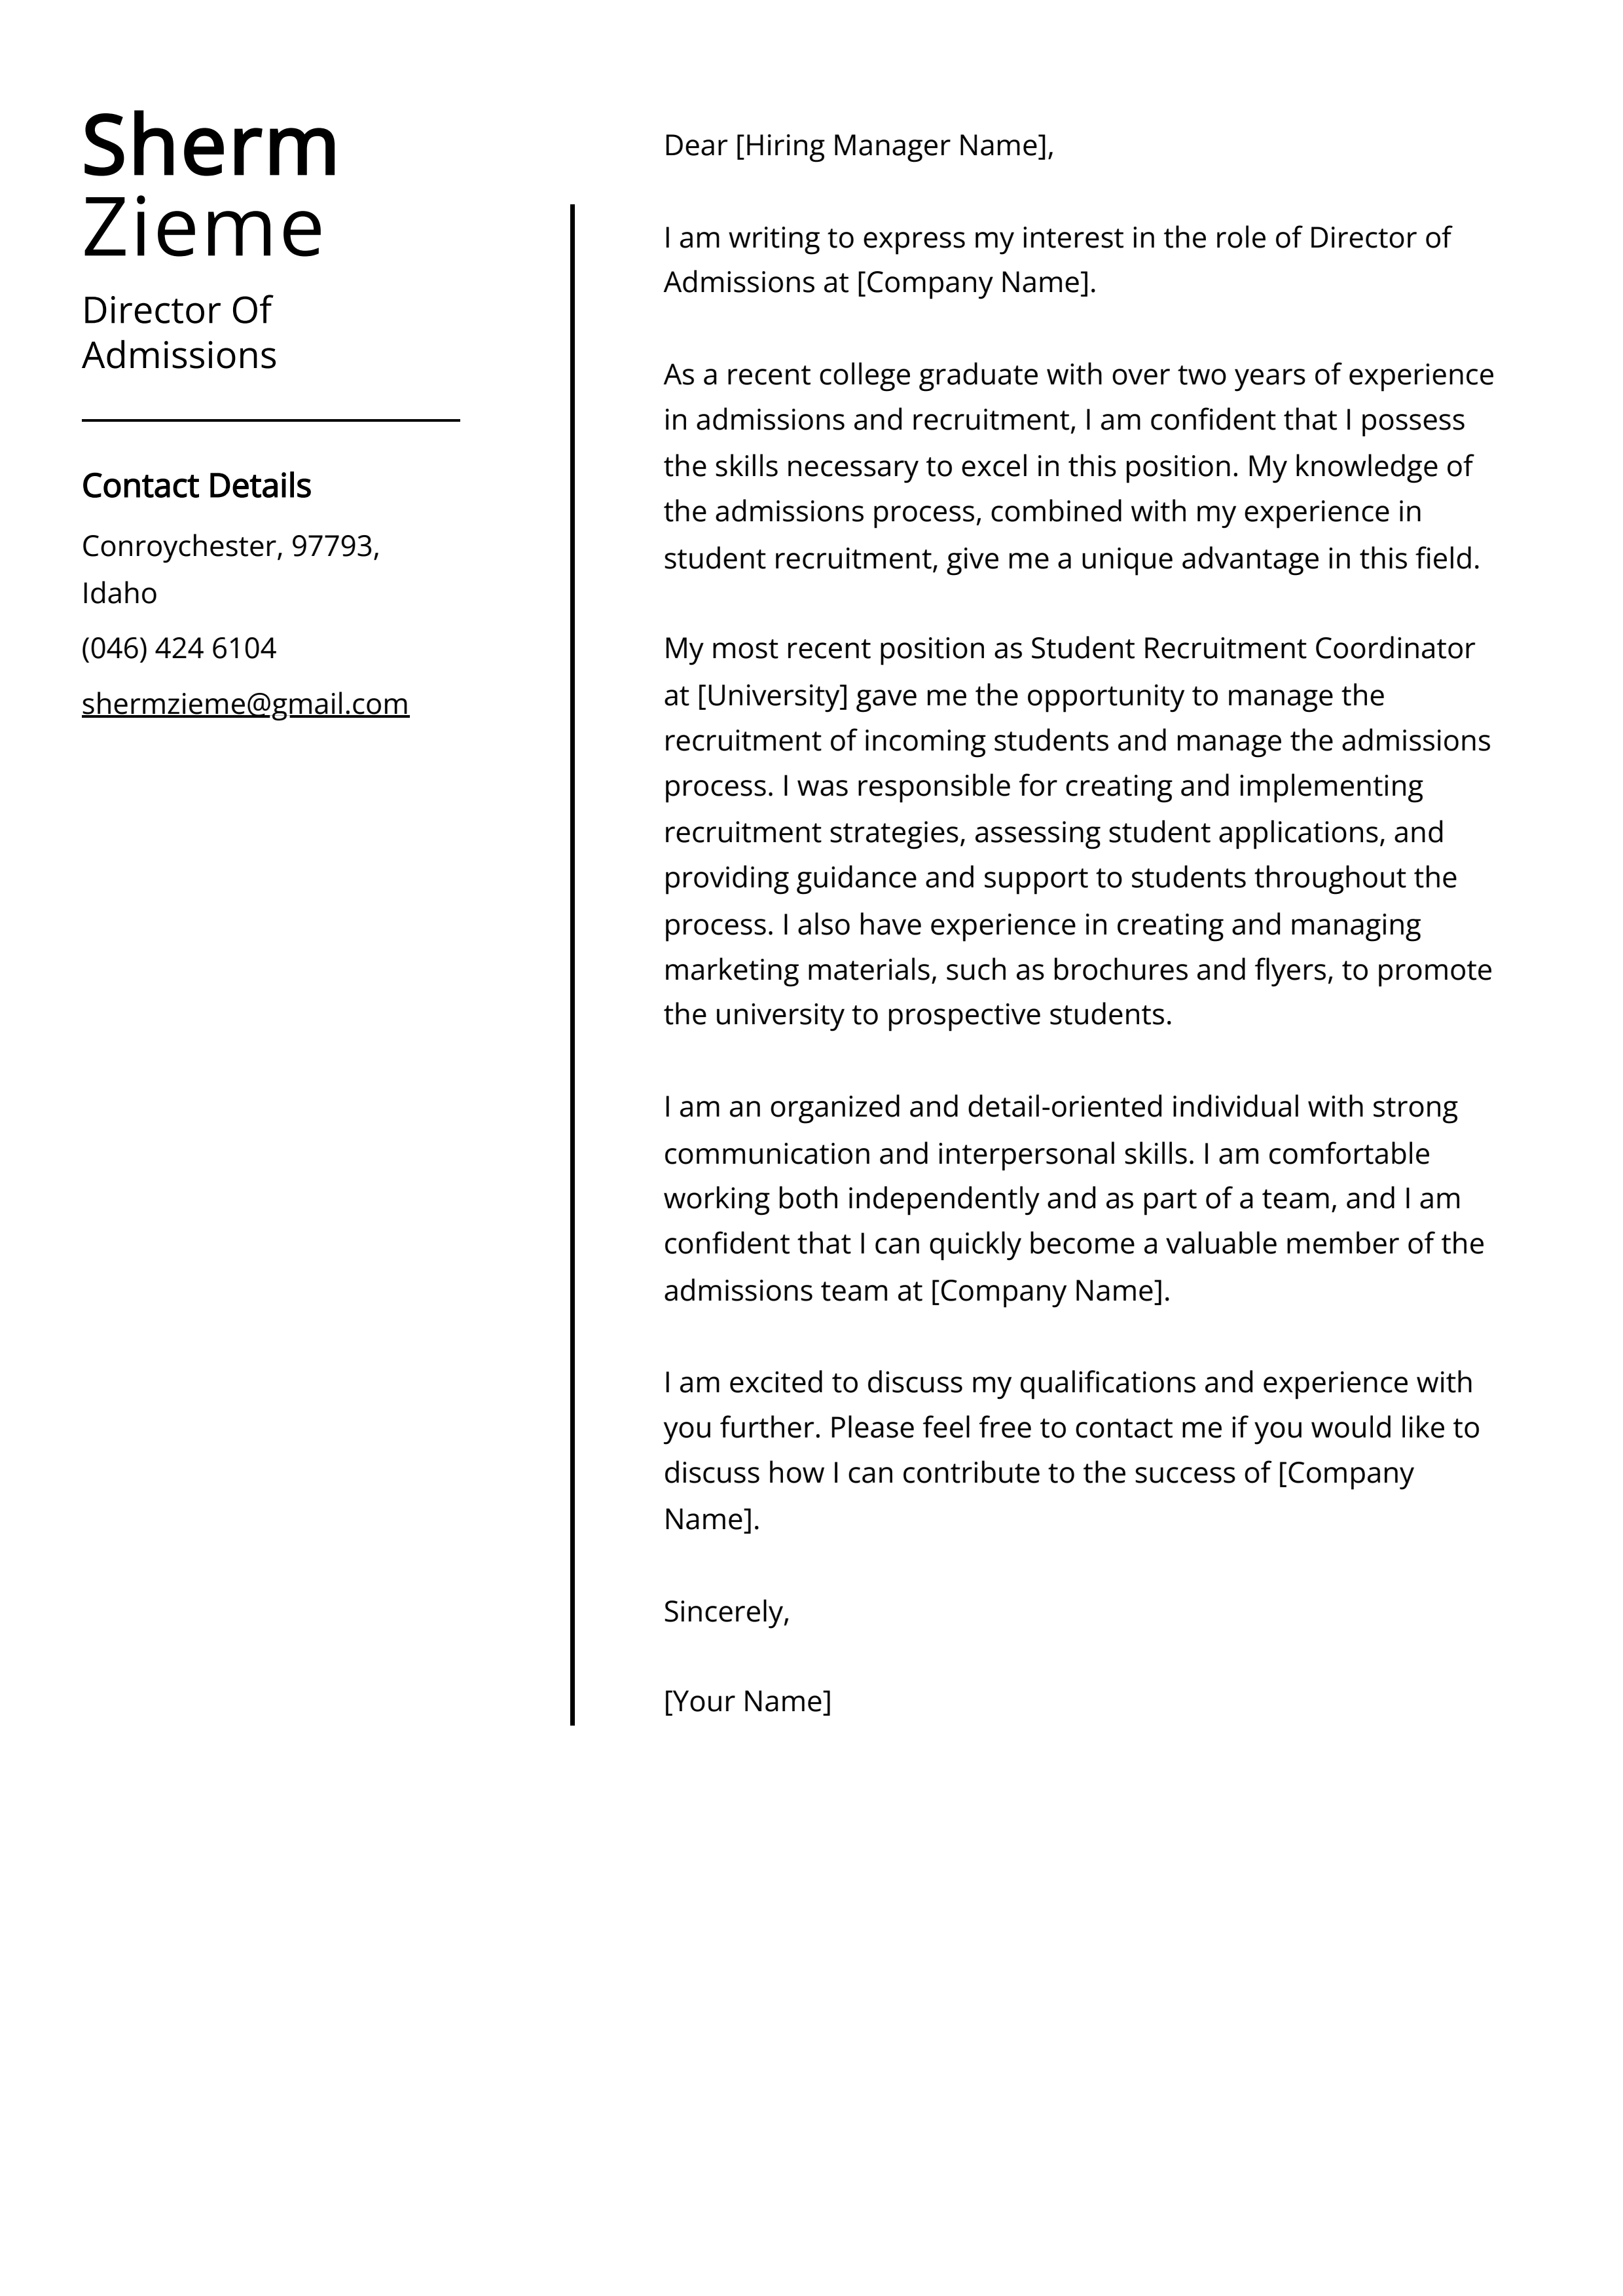 Director Of Admissions Cover Letter Example